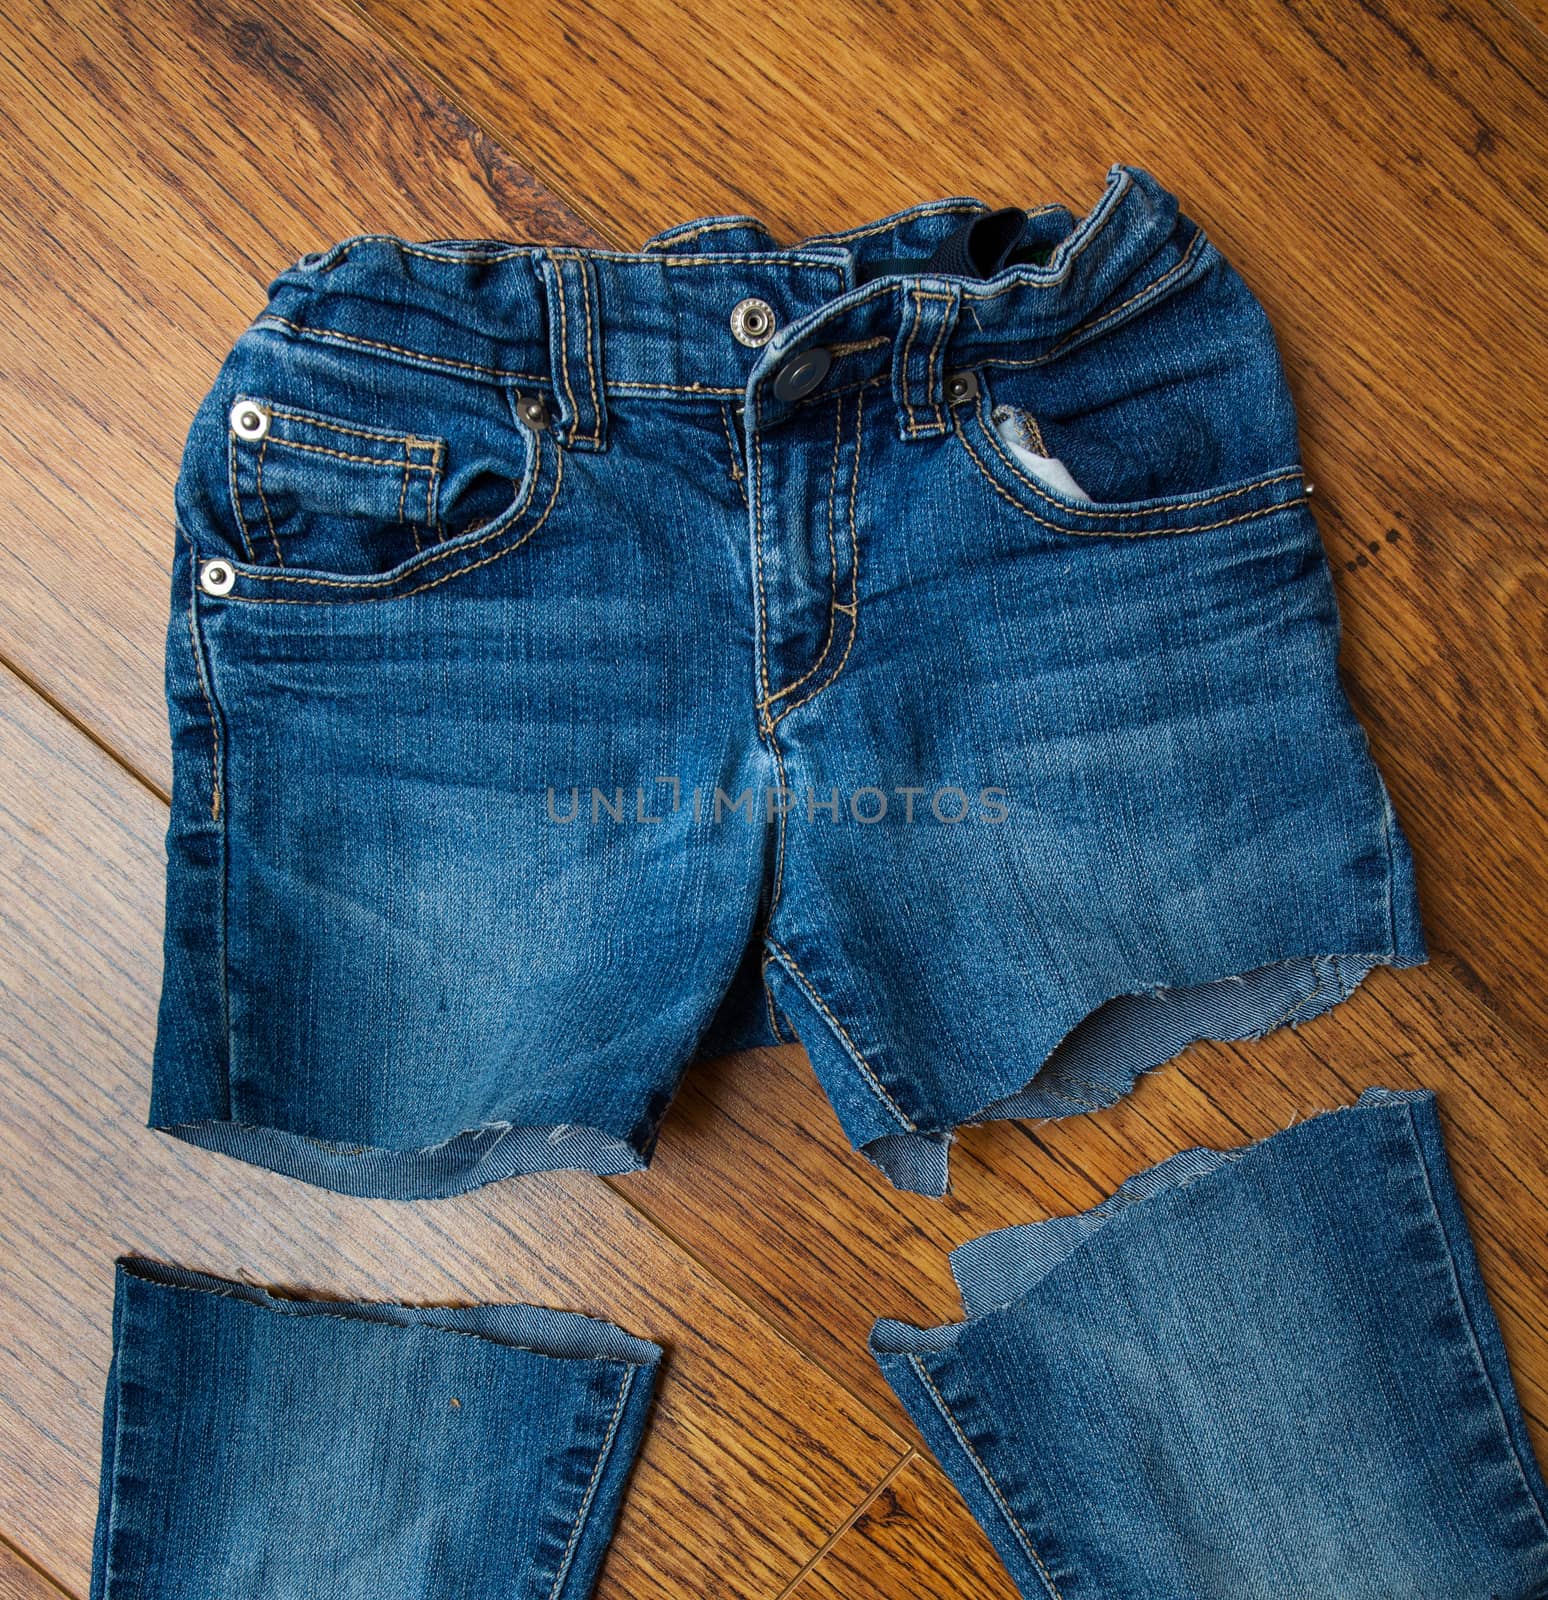 cut old jeans on wooden boards